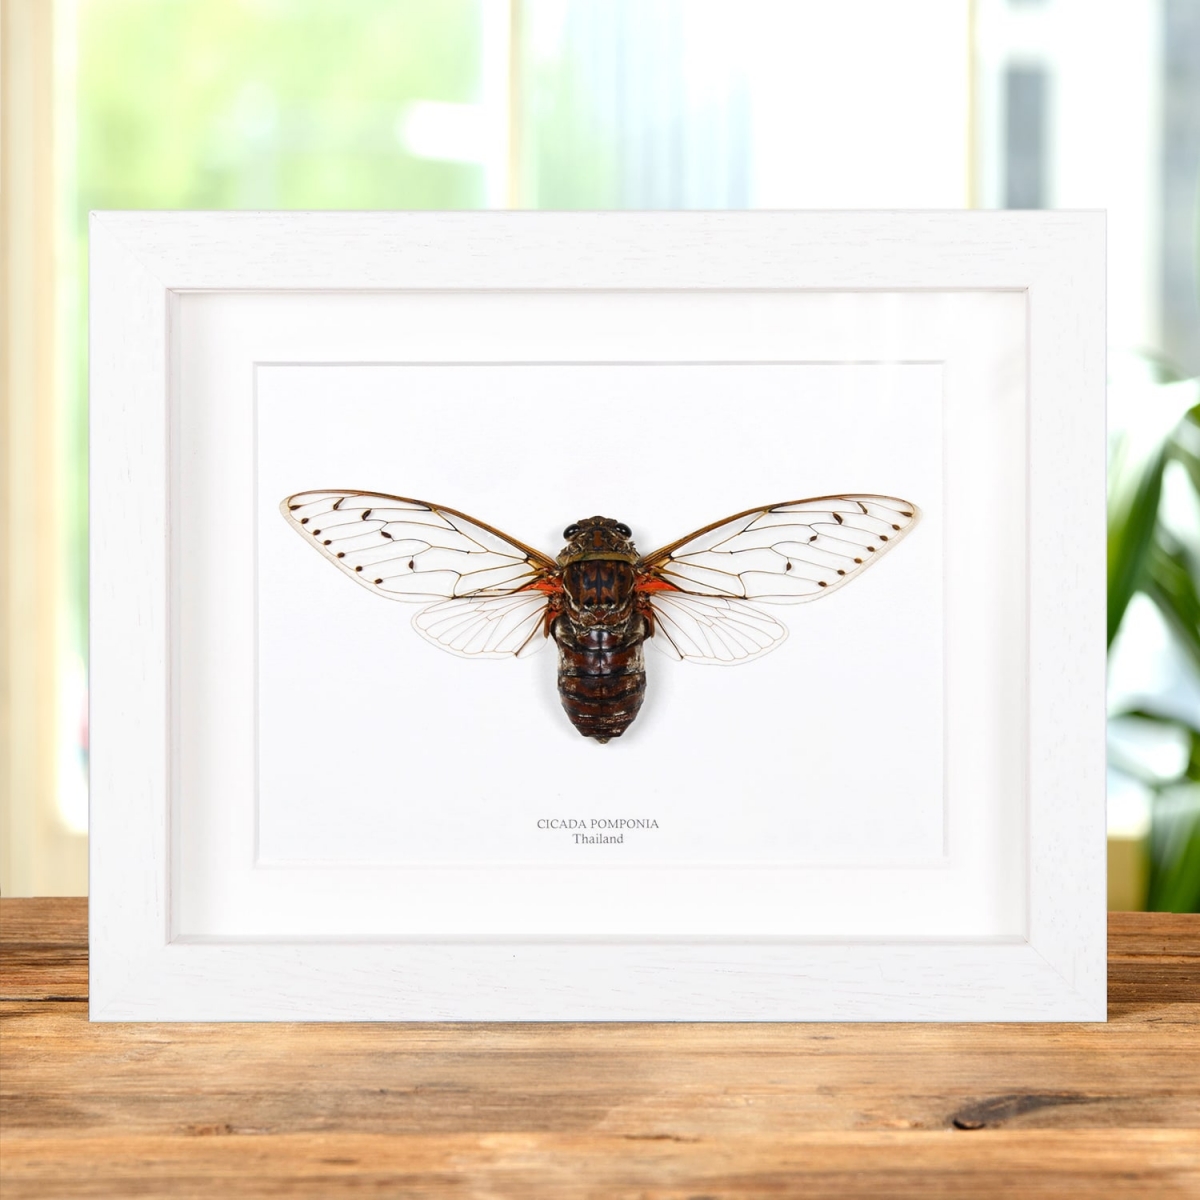 Cicada Pomponia in Box Frame from Thailand